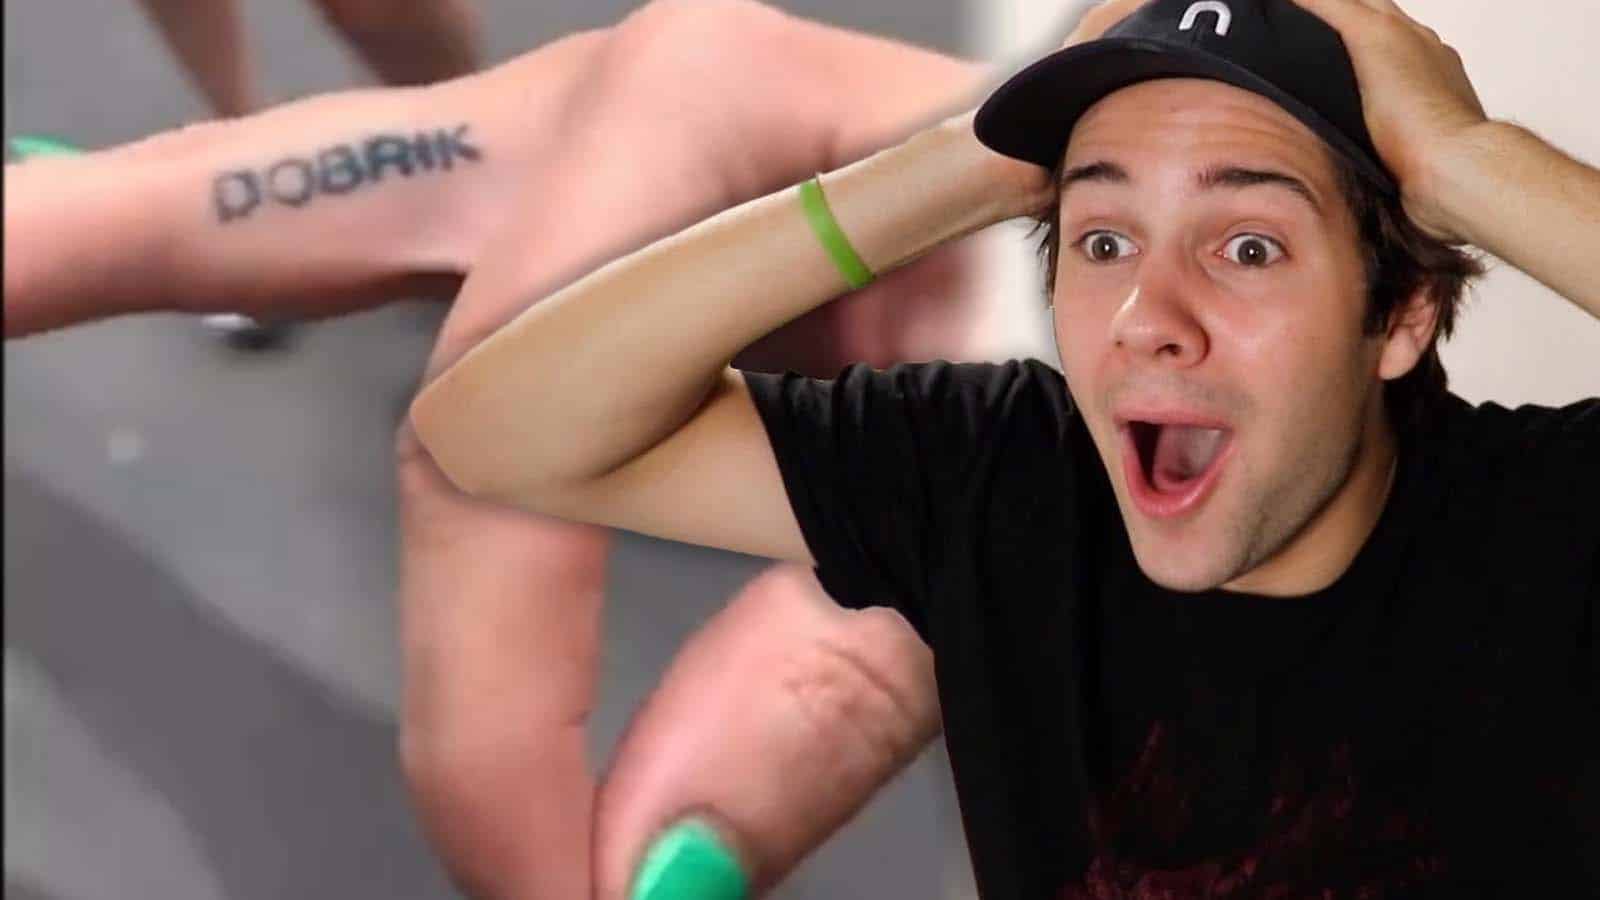 David Dobrik left speechless after superfan gets a tattoo of YouTube star